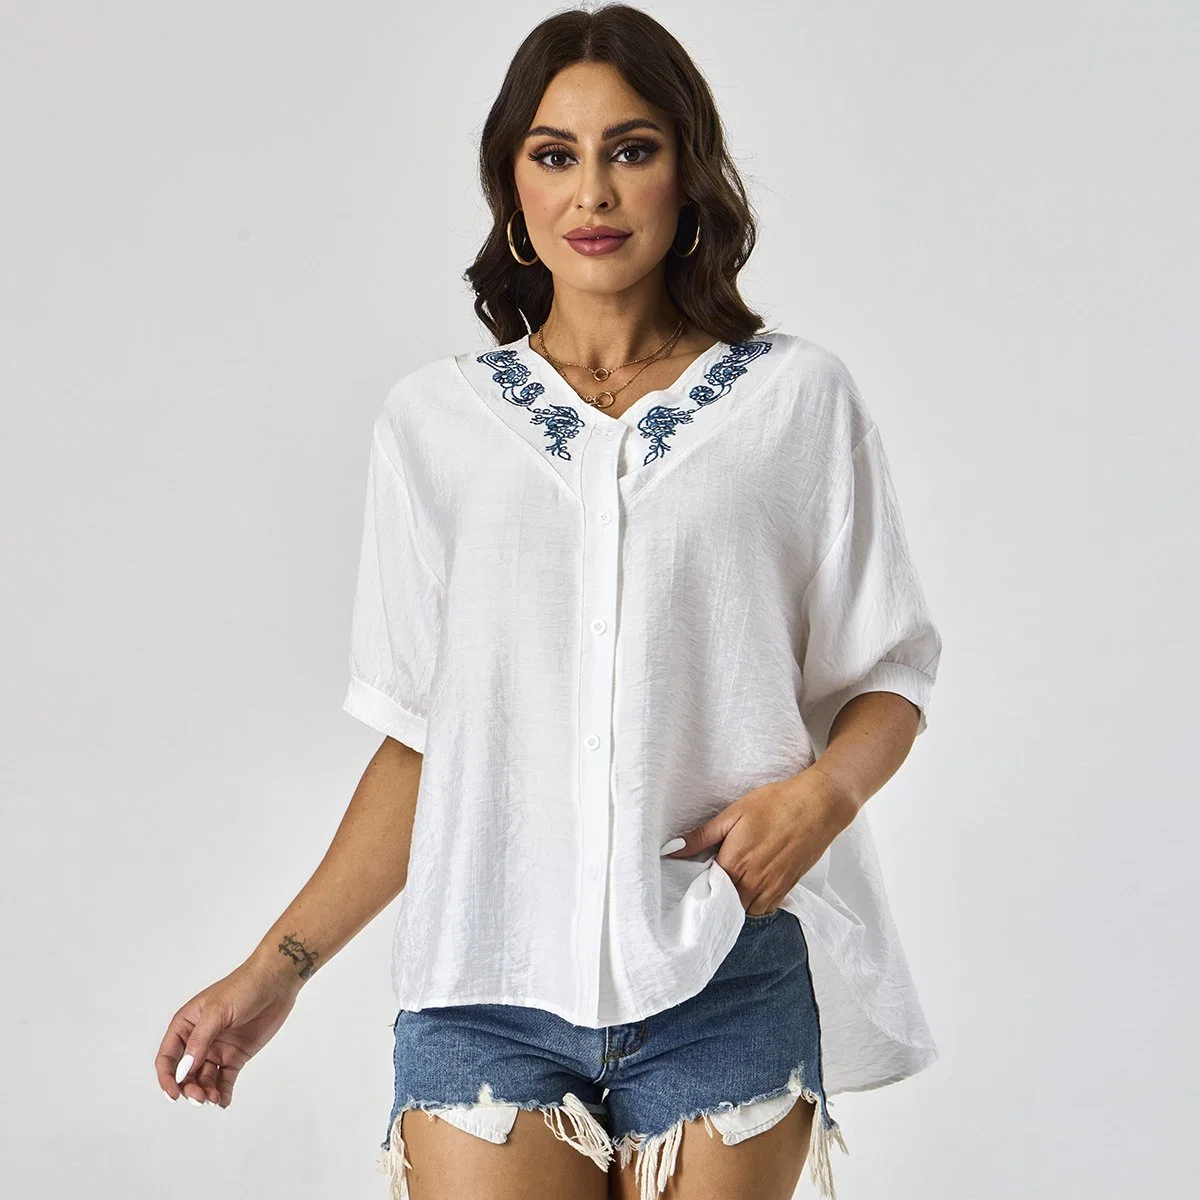 Custom White Color V Neck Floral Embroidery Woven Female Top Short Sleeve Women Shirts